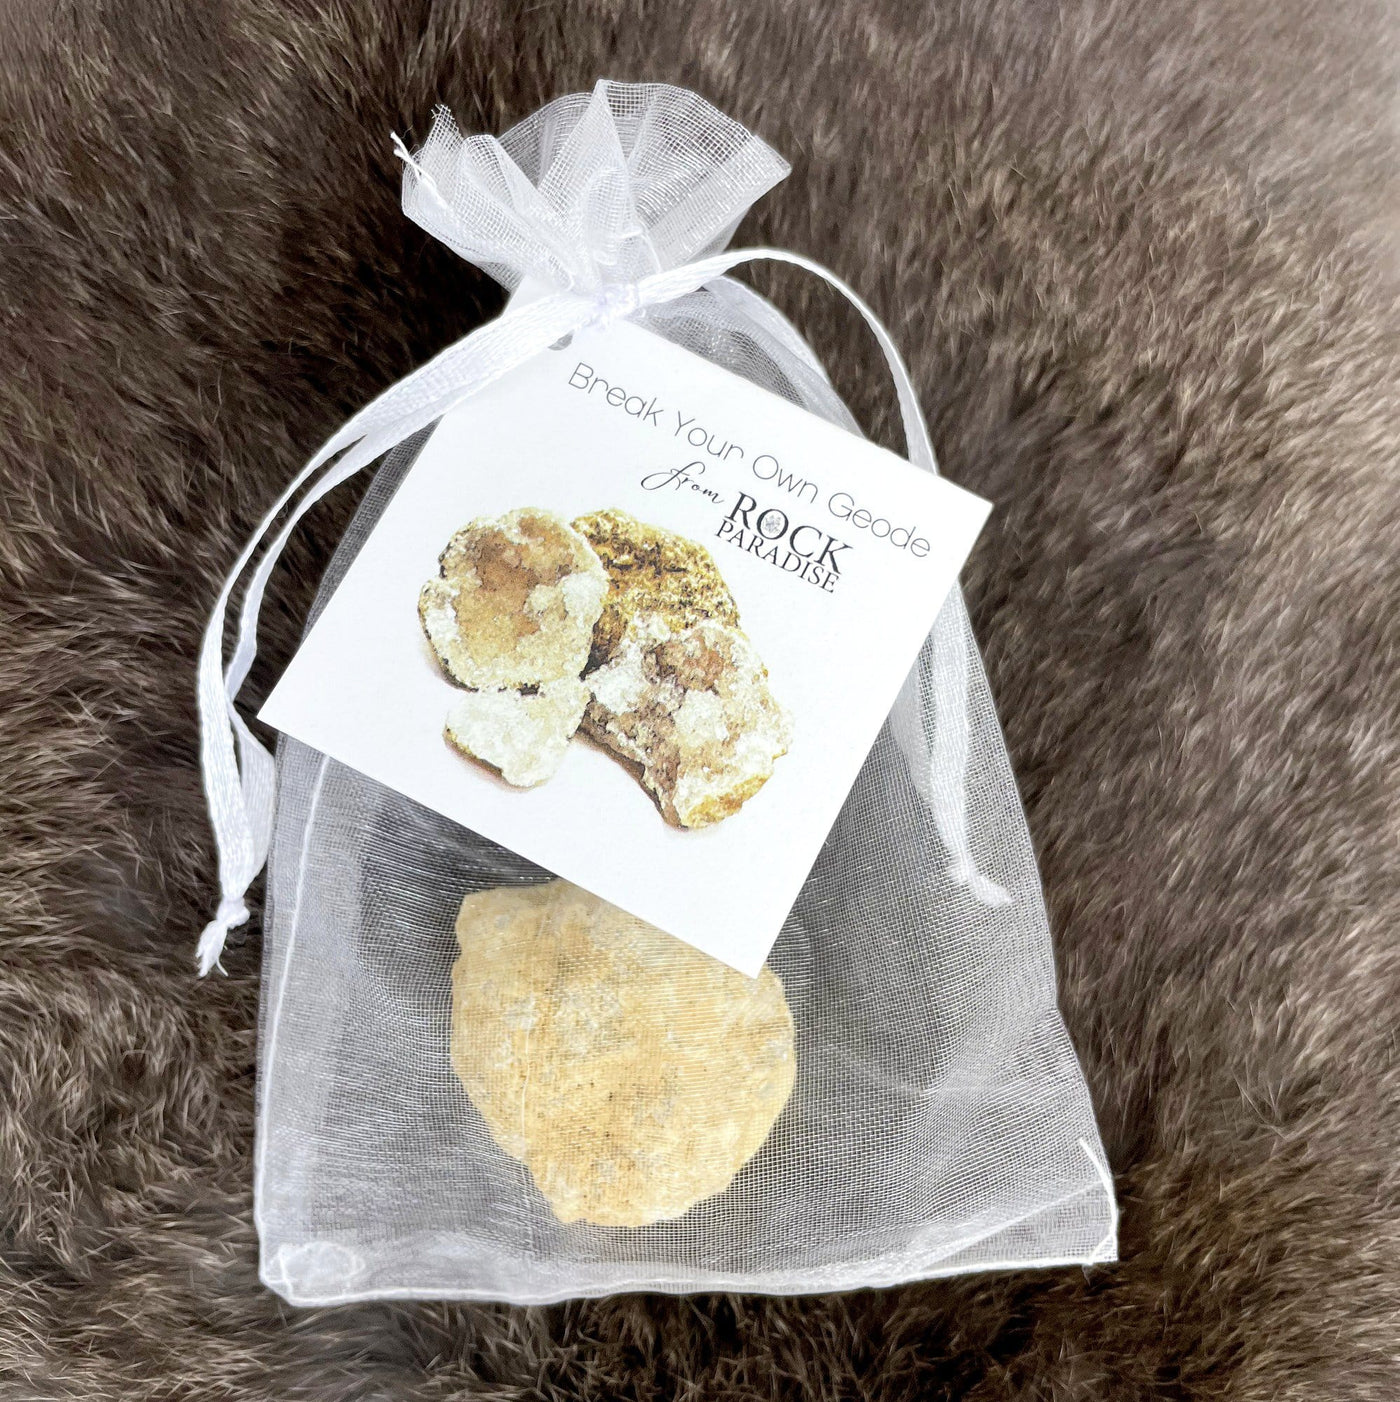 geode in a mesh bag with a tag